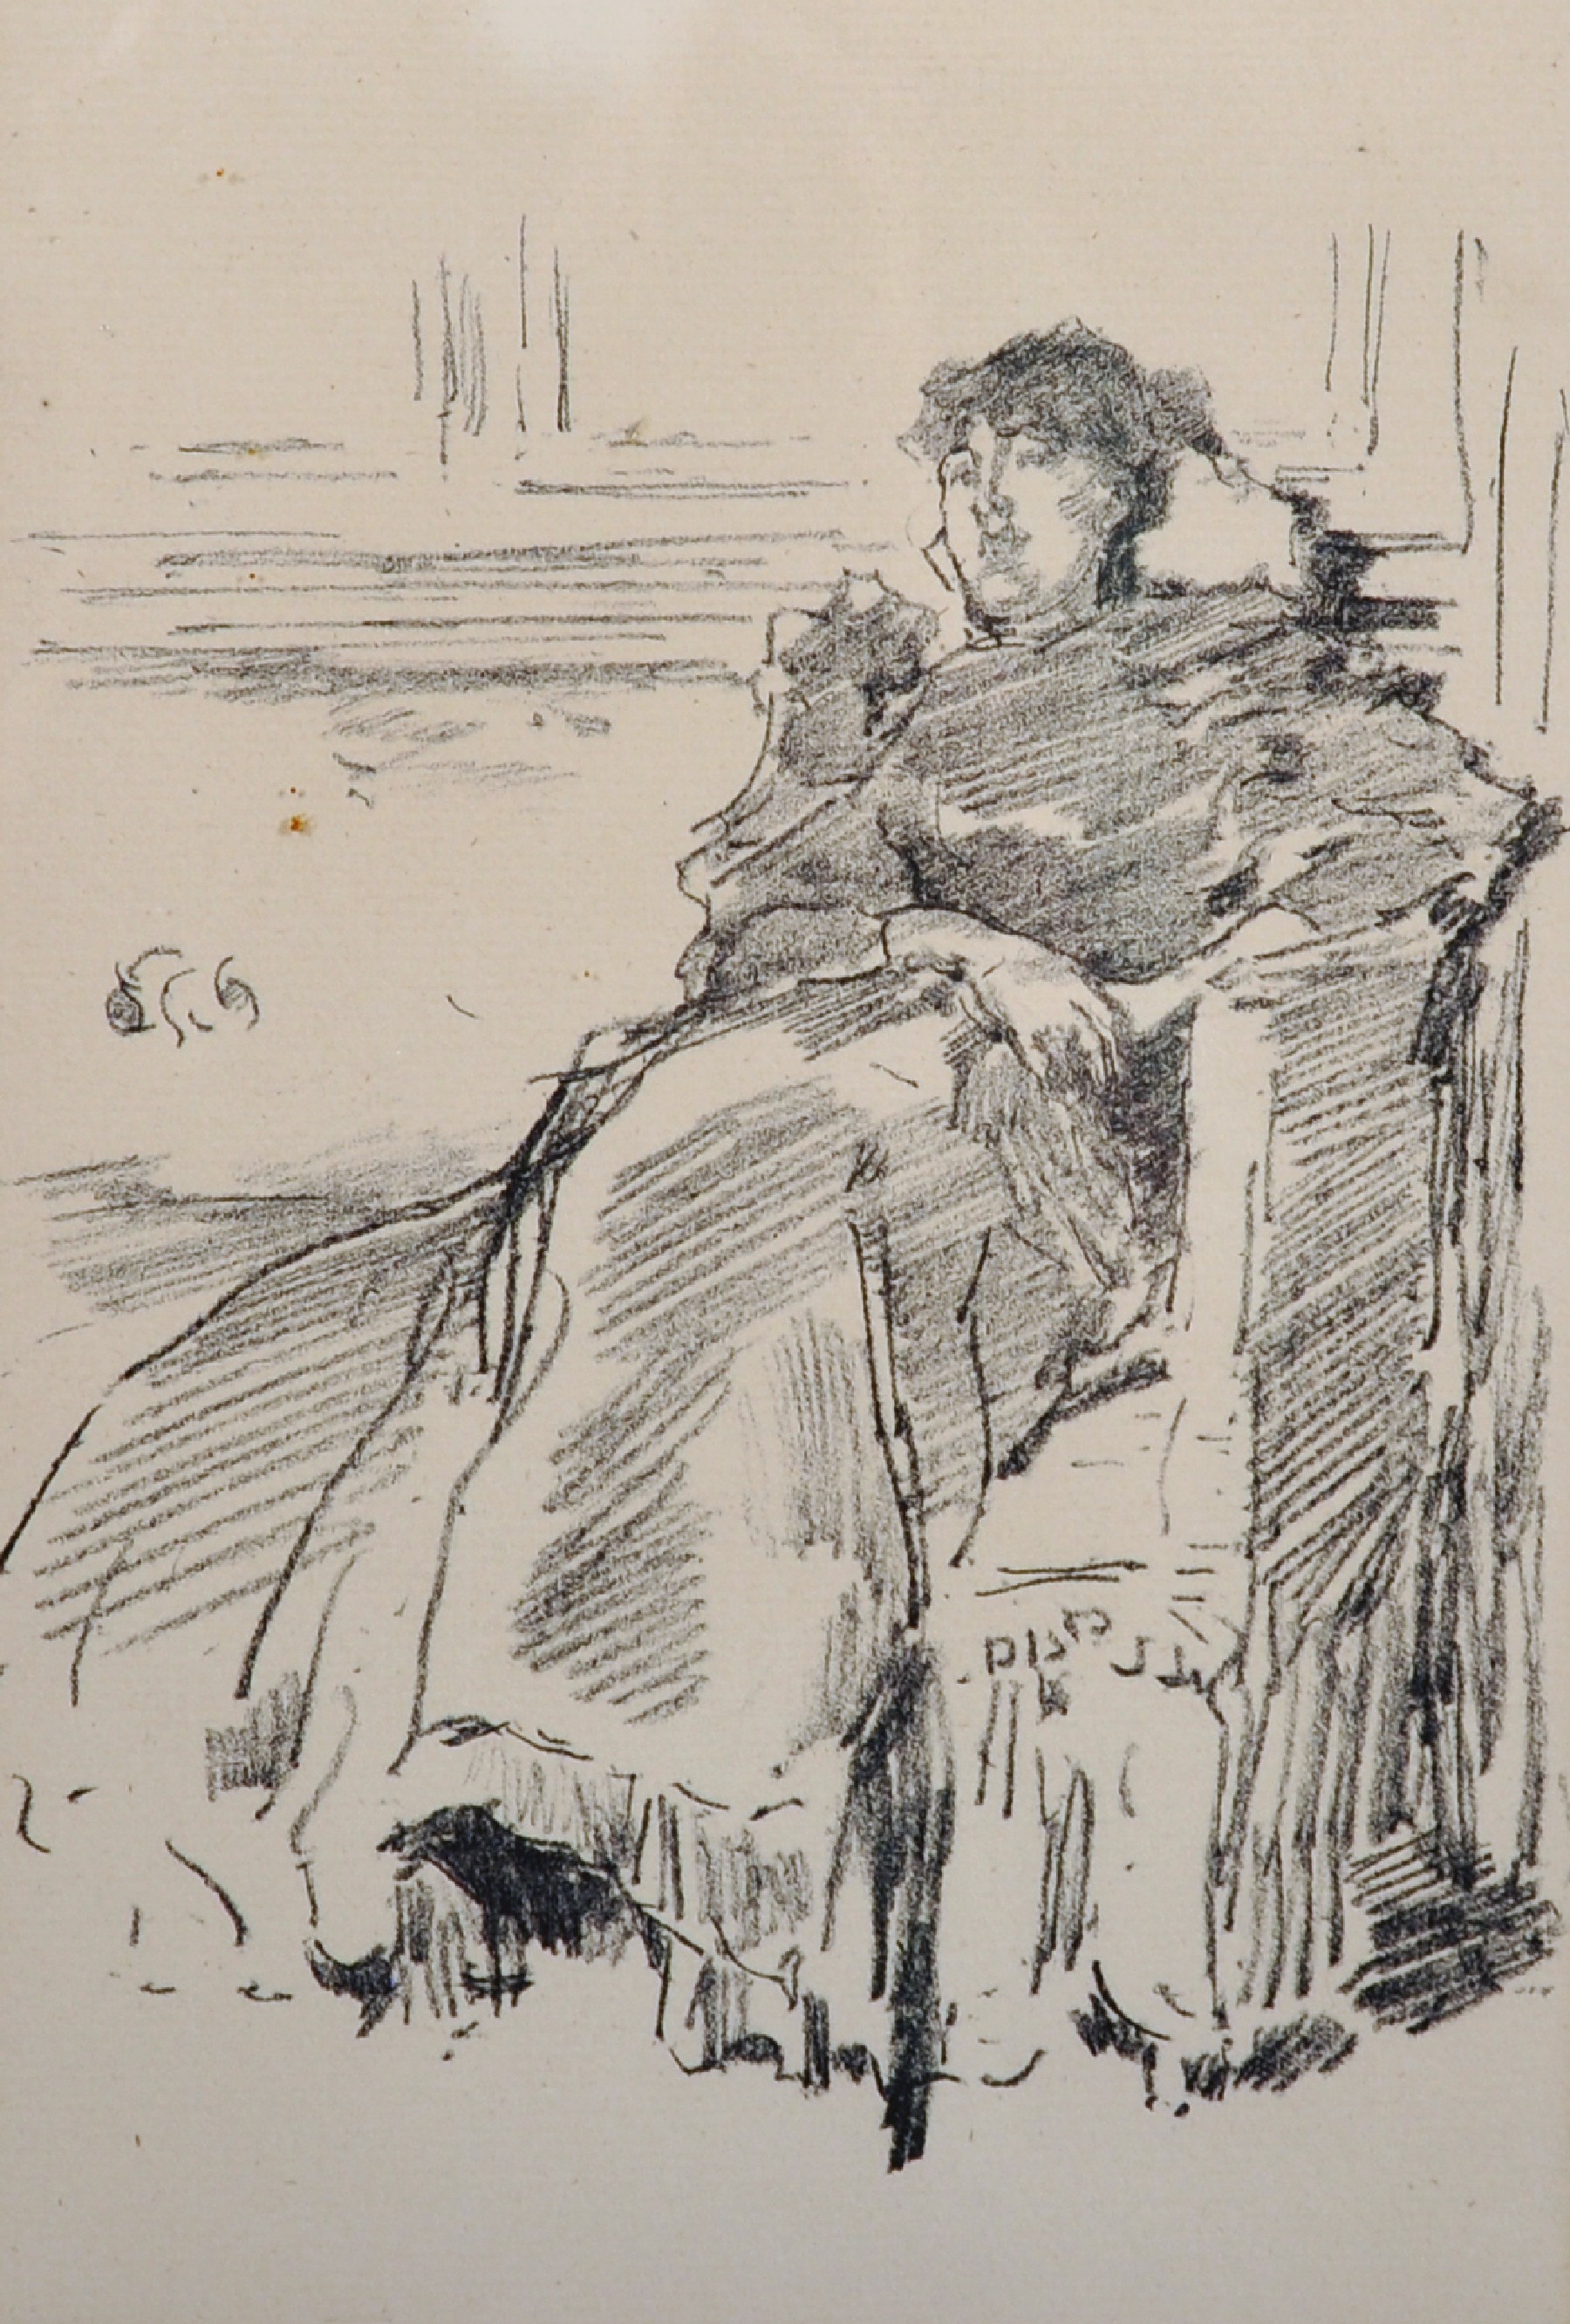 James Abbot McNeill Whistler (1834-1903) British. "La Robe Rouge", Lithograph, Inscribed on a